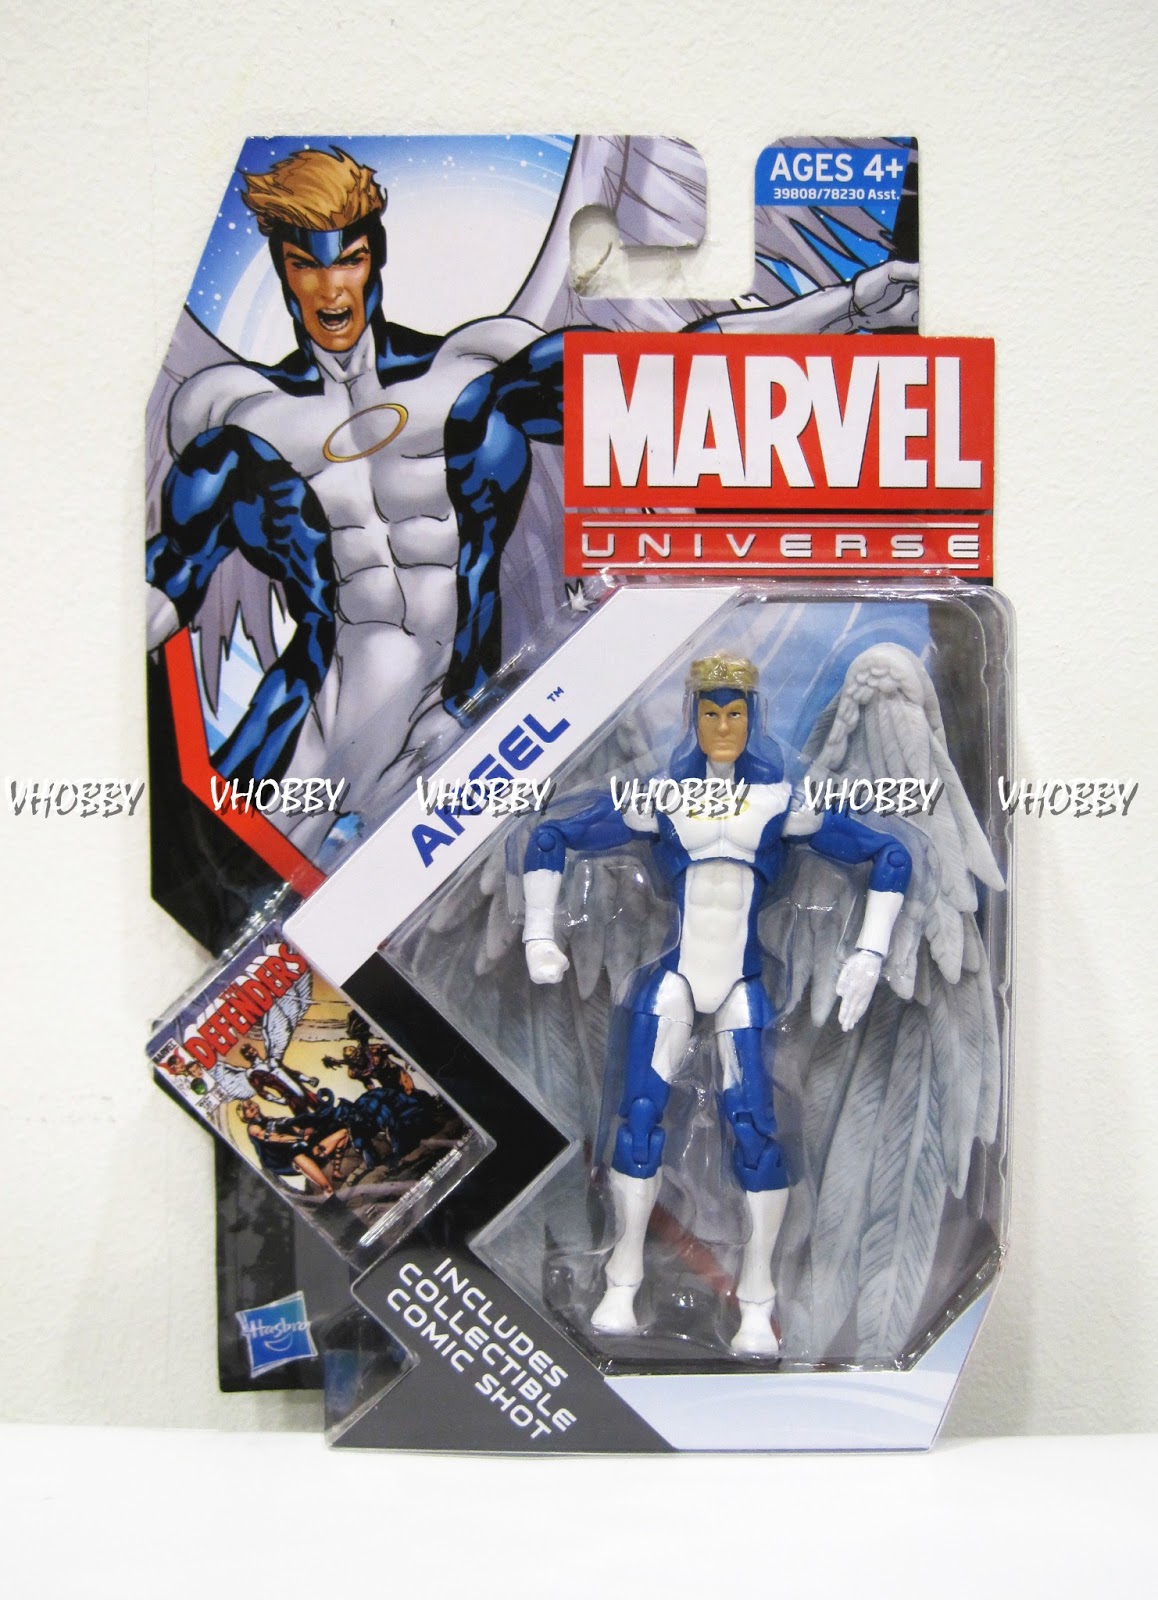 VHOBBY MARVEL Marvel Universe 3.75" Action Figure